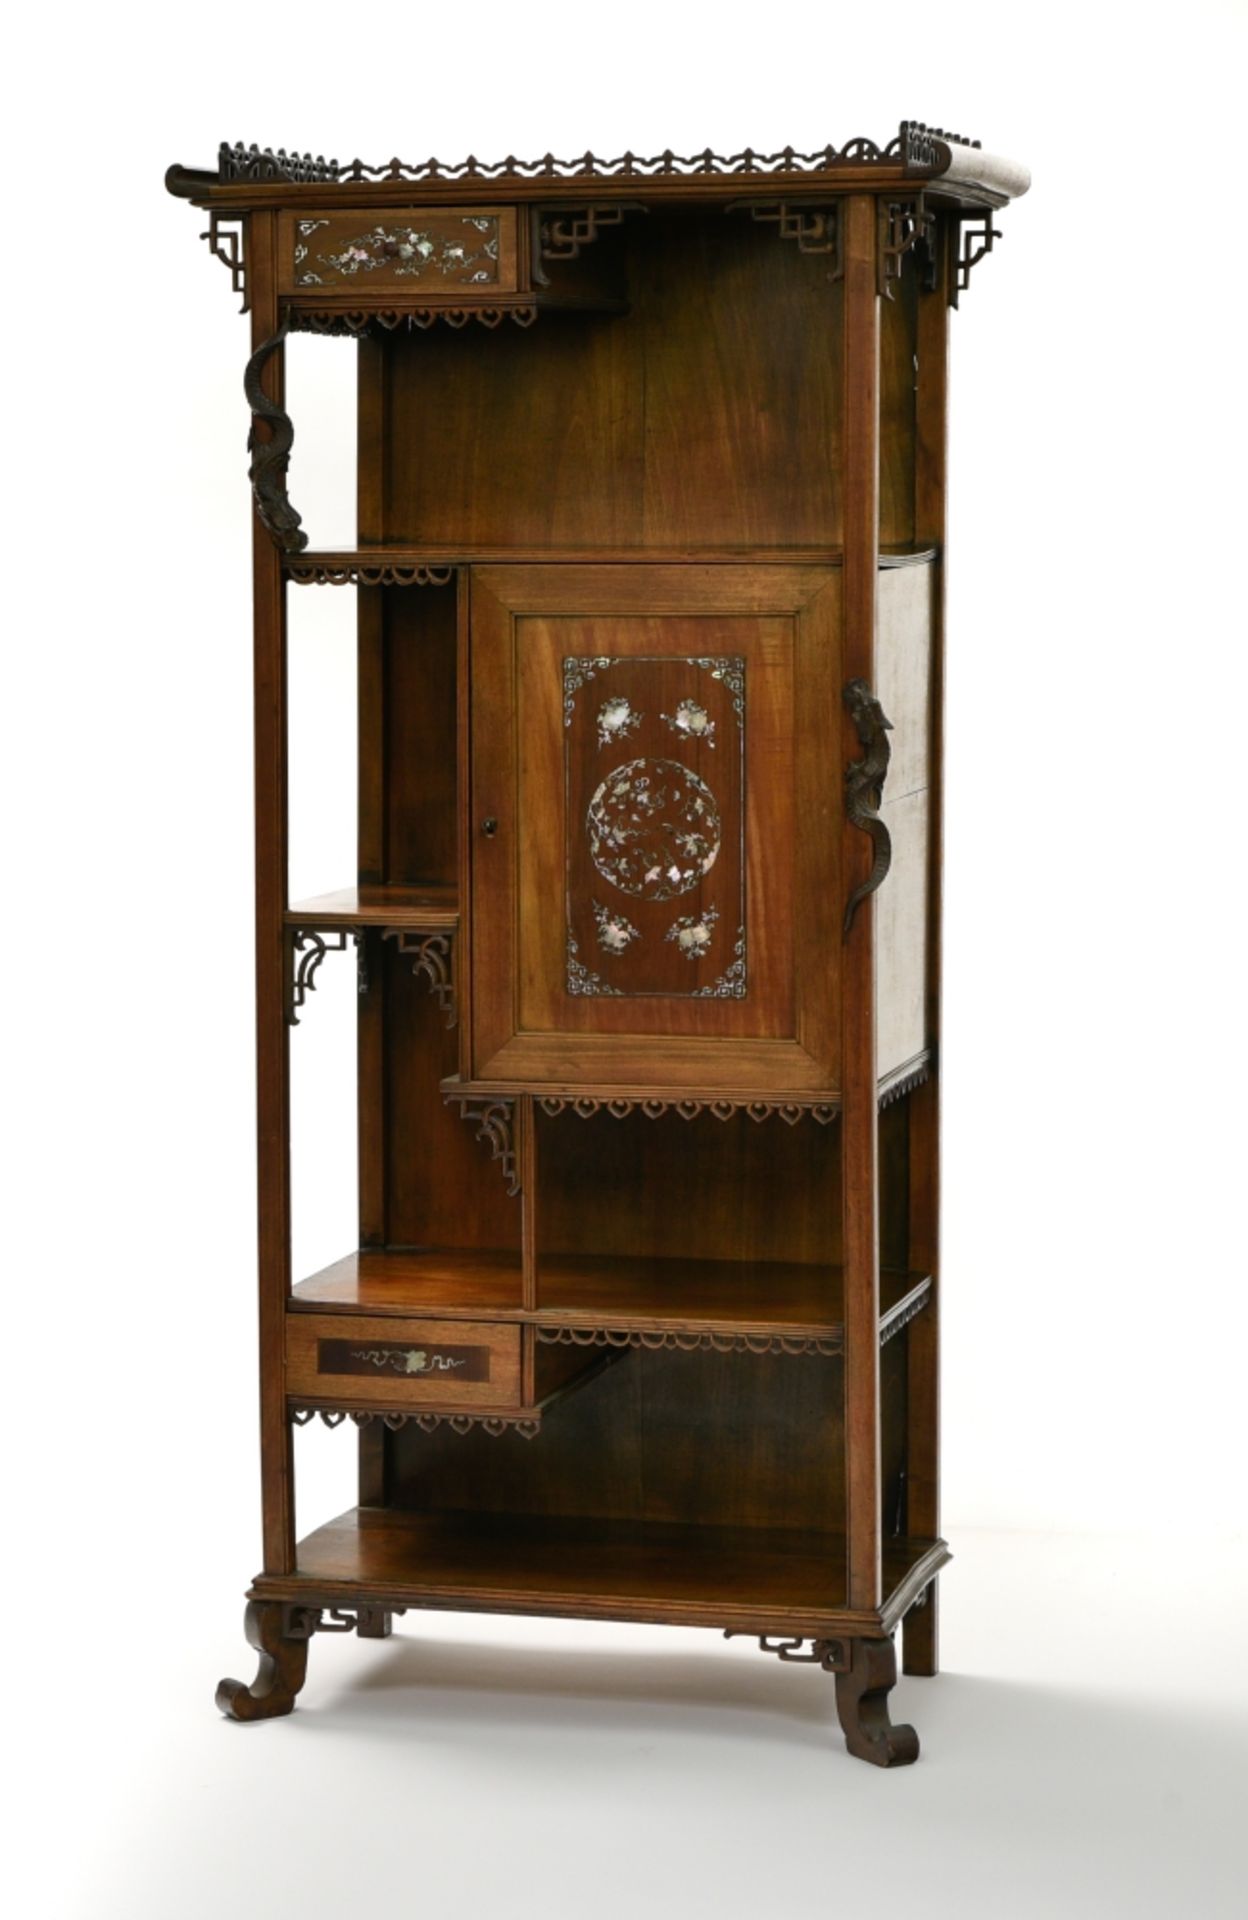 Gabriel VIARDOT (1830-1906) attributed to Collector's cabinet carved, stained, and burgautŽ wood,